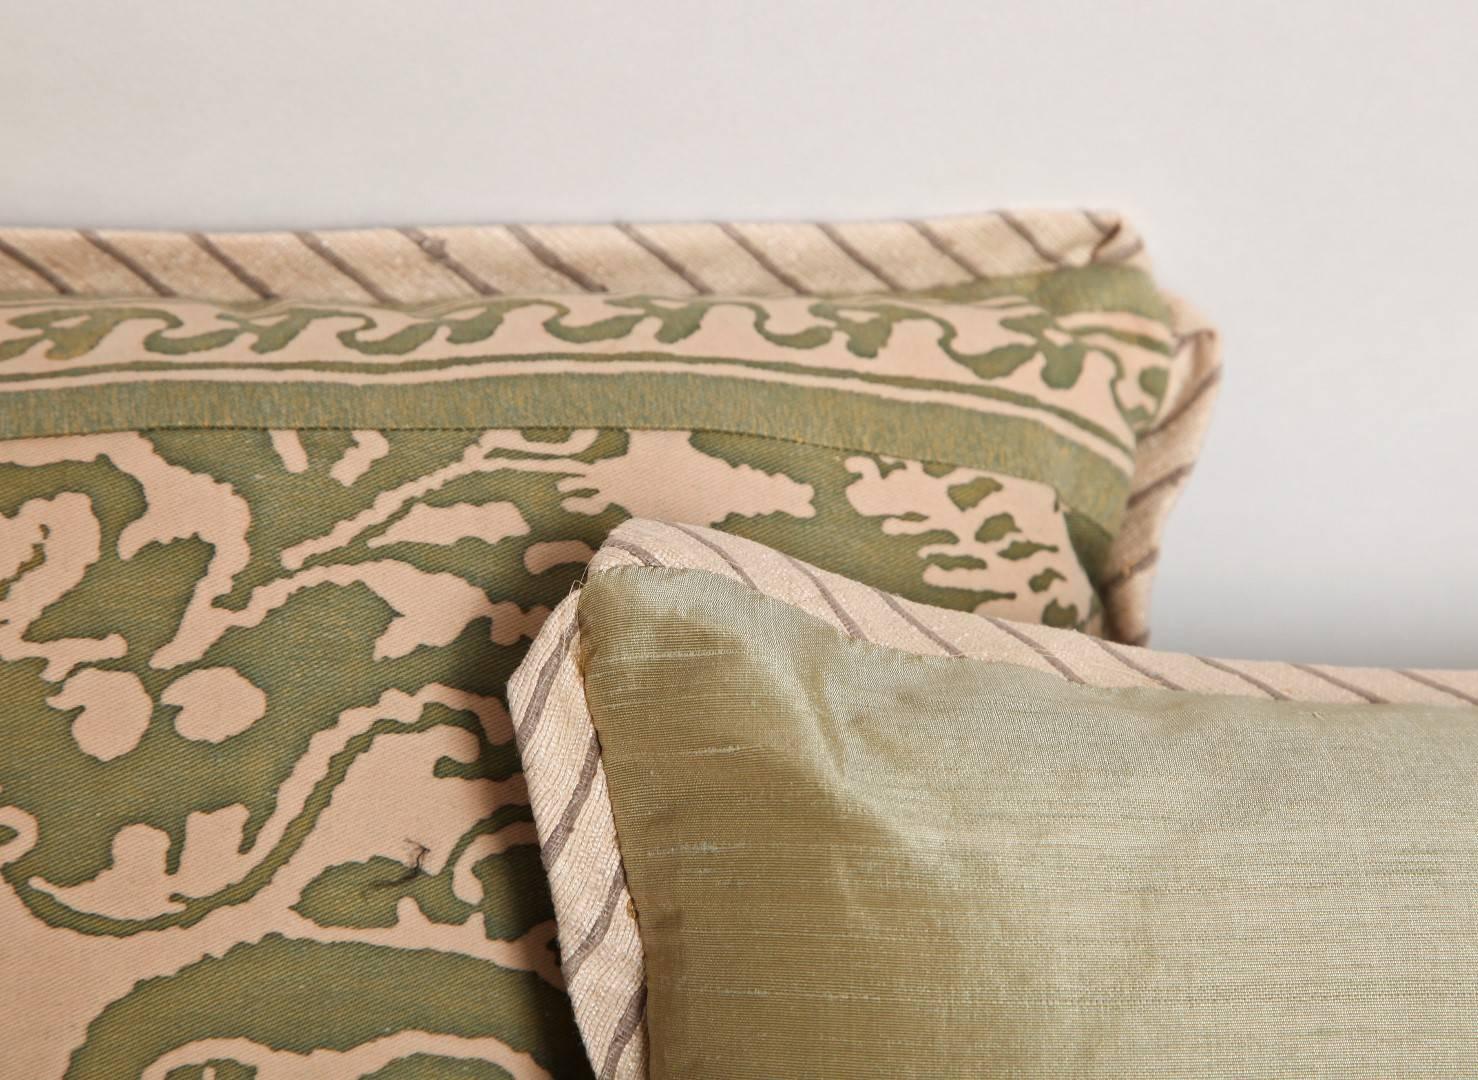 A Pair of Fortuny Fabric Cushions in the Sevigne Pattern 1